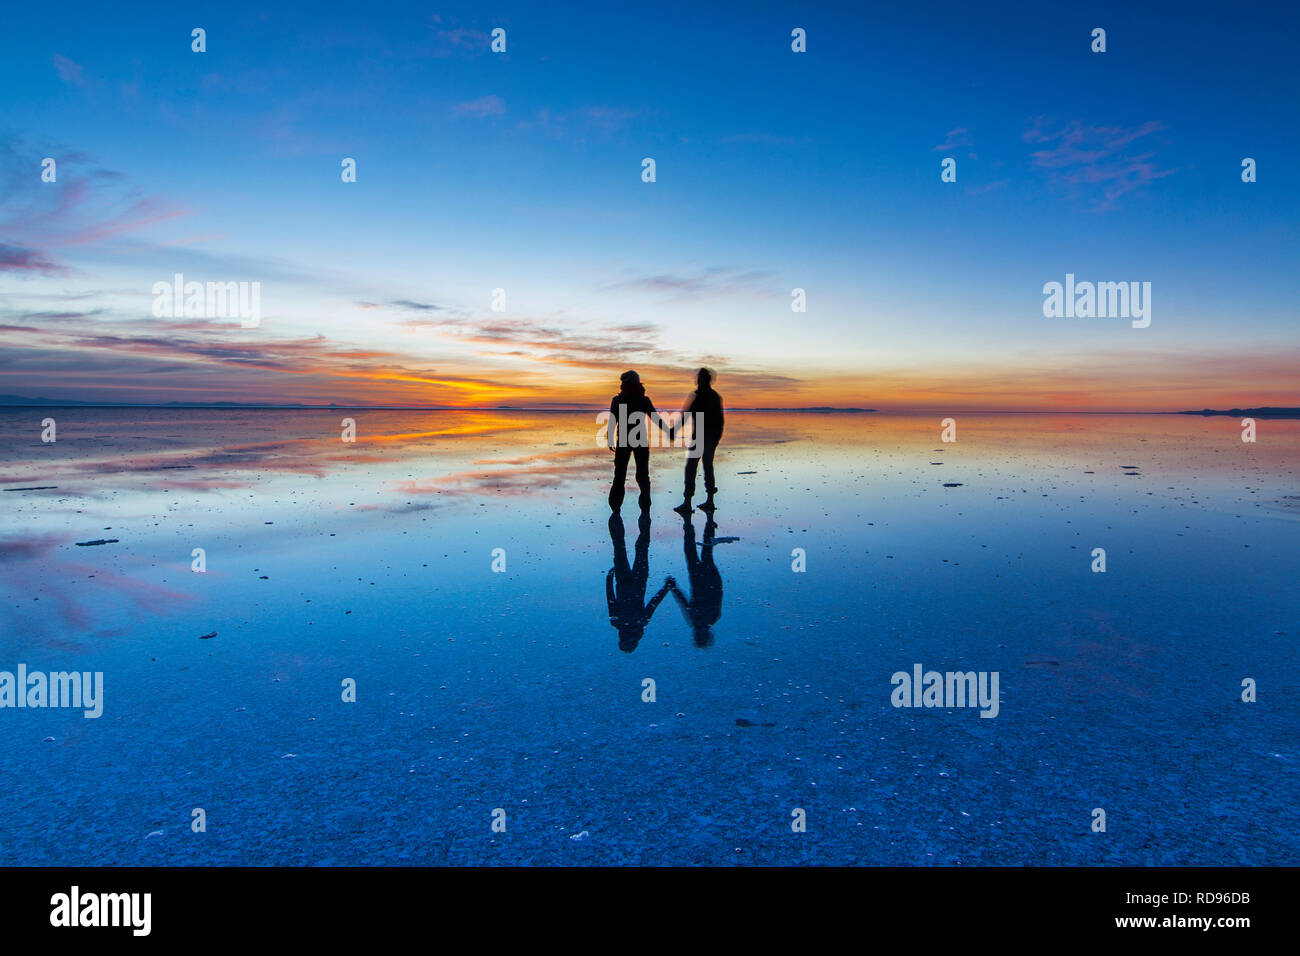 Couple looking to Sunrise at Uyuni saltflats. Sunrise over an infinite horizon in Salar de Uyuni with people reflections in water, a colorful scenery Stock Photo